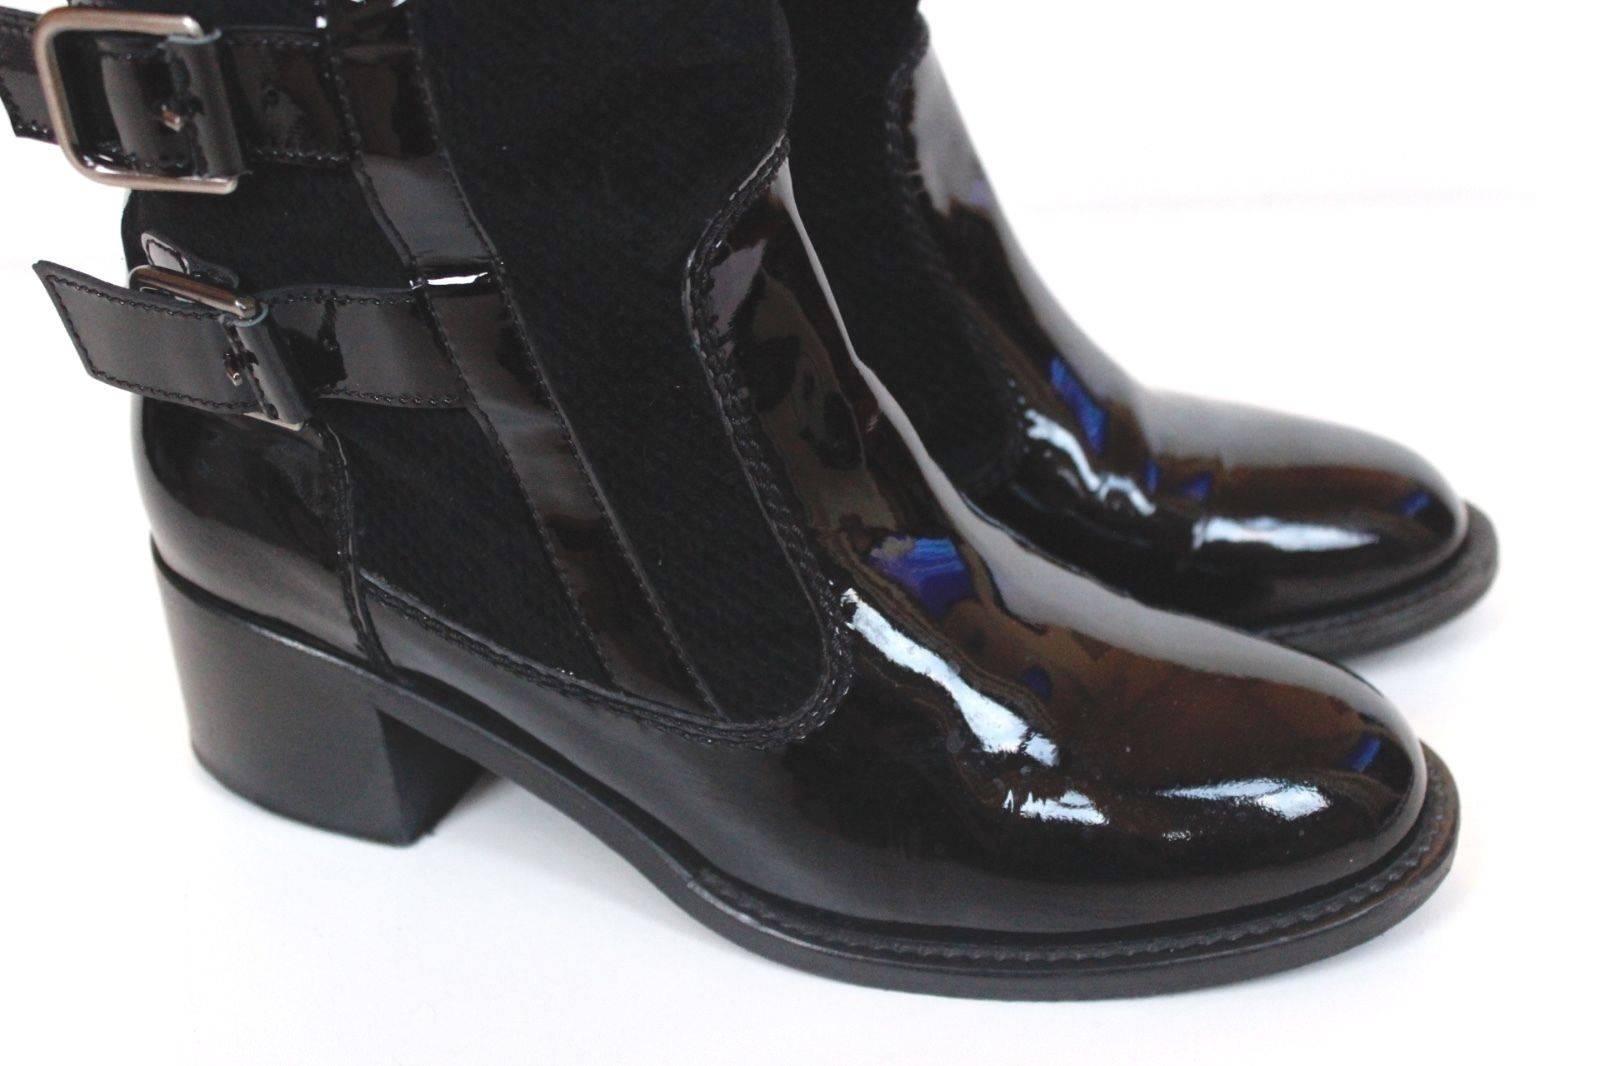 CHANEL Black Patent Leather Multi Buckle Boots 36.5 UK 3.5 In Excellent Condition For Sale In London, GB